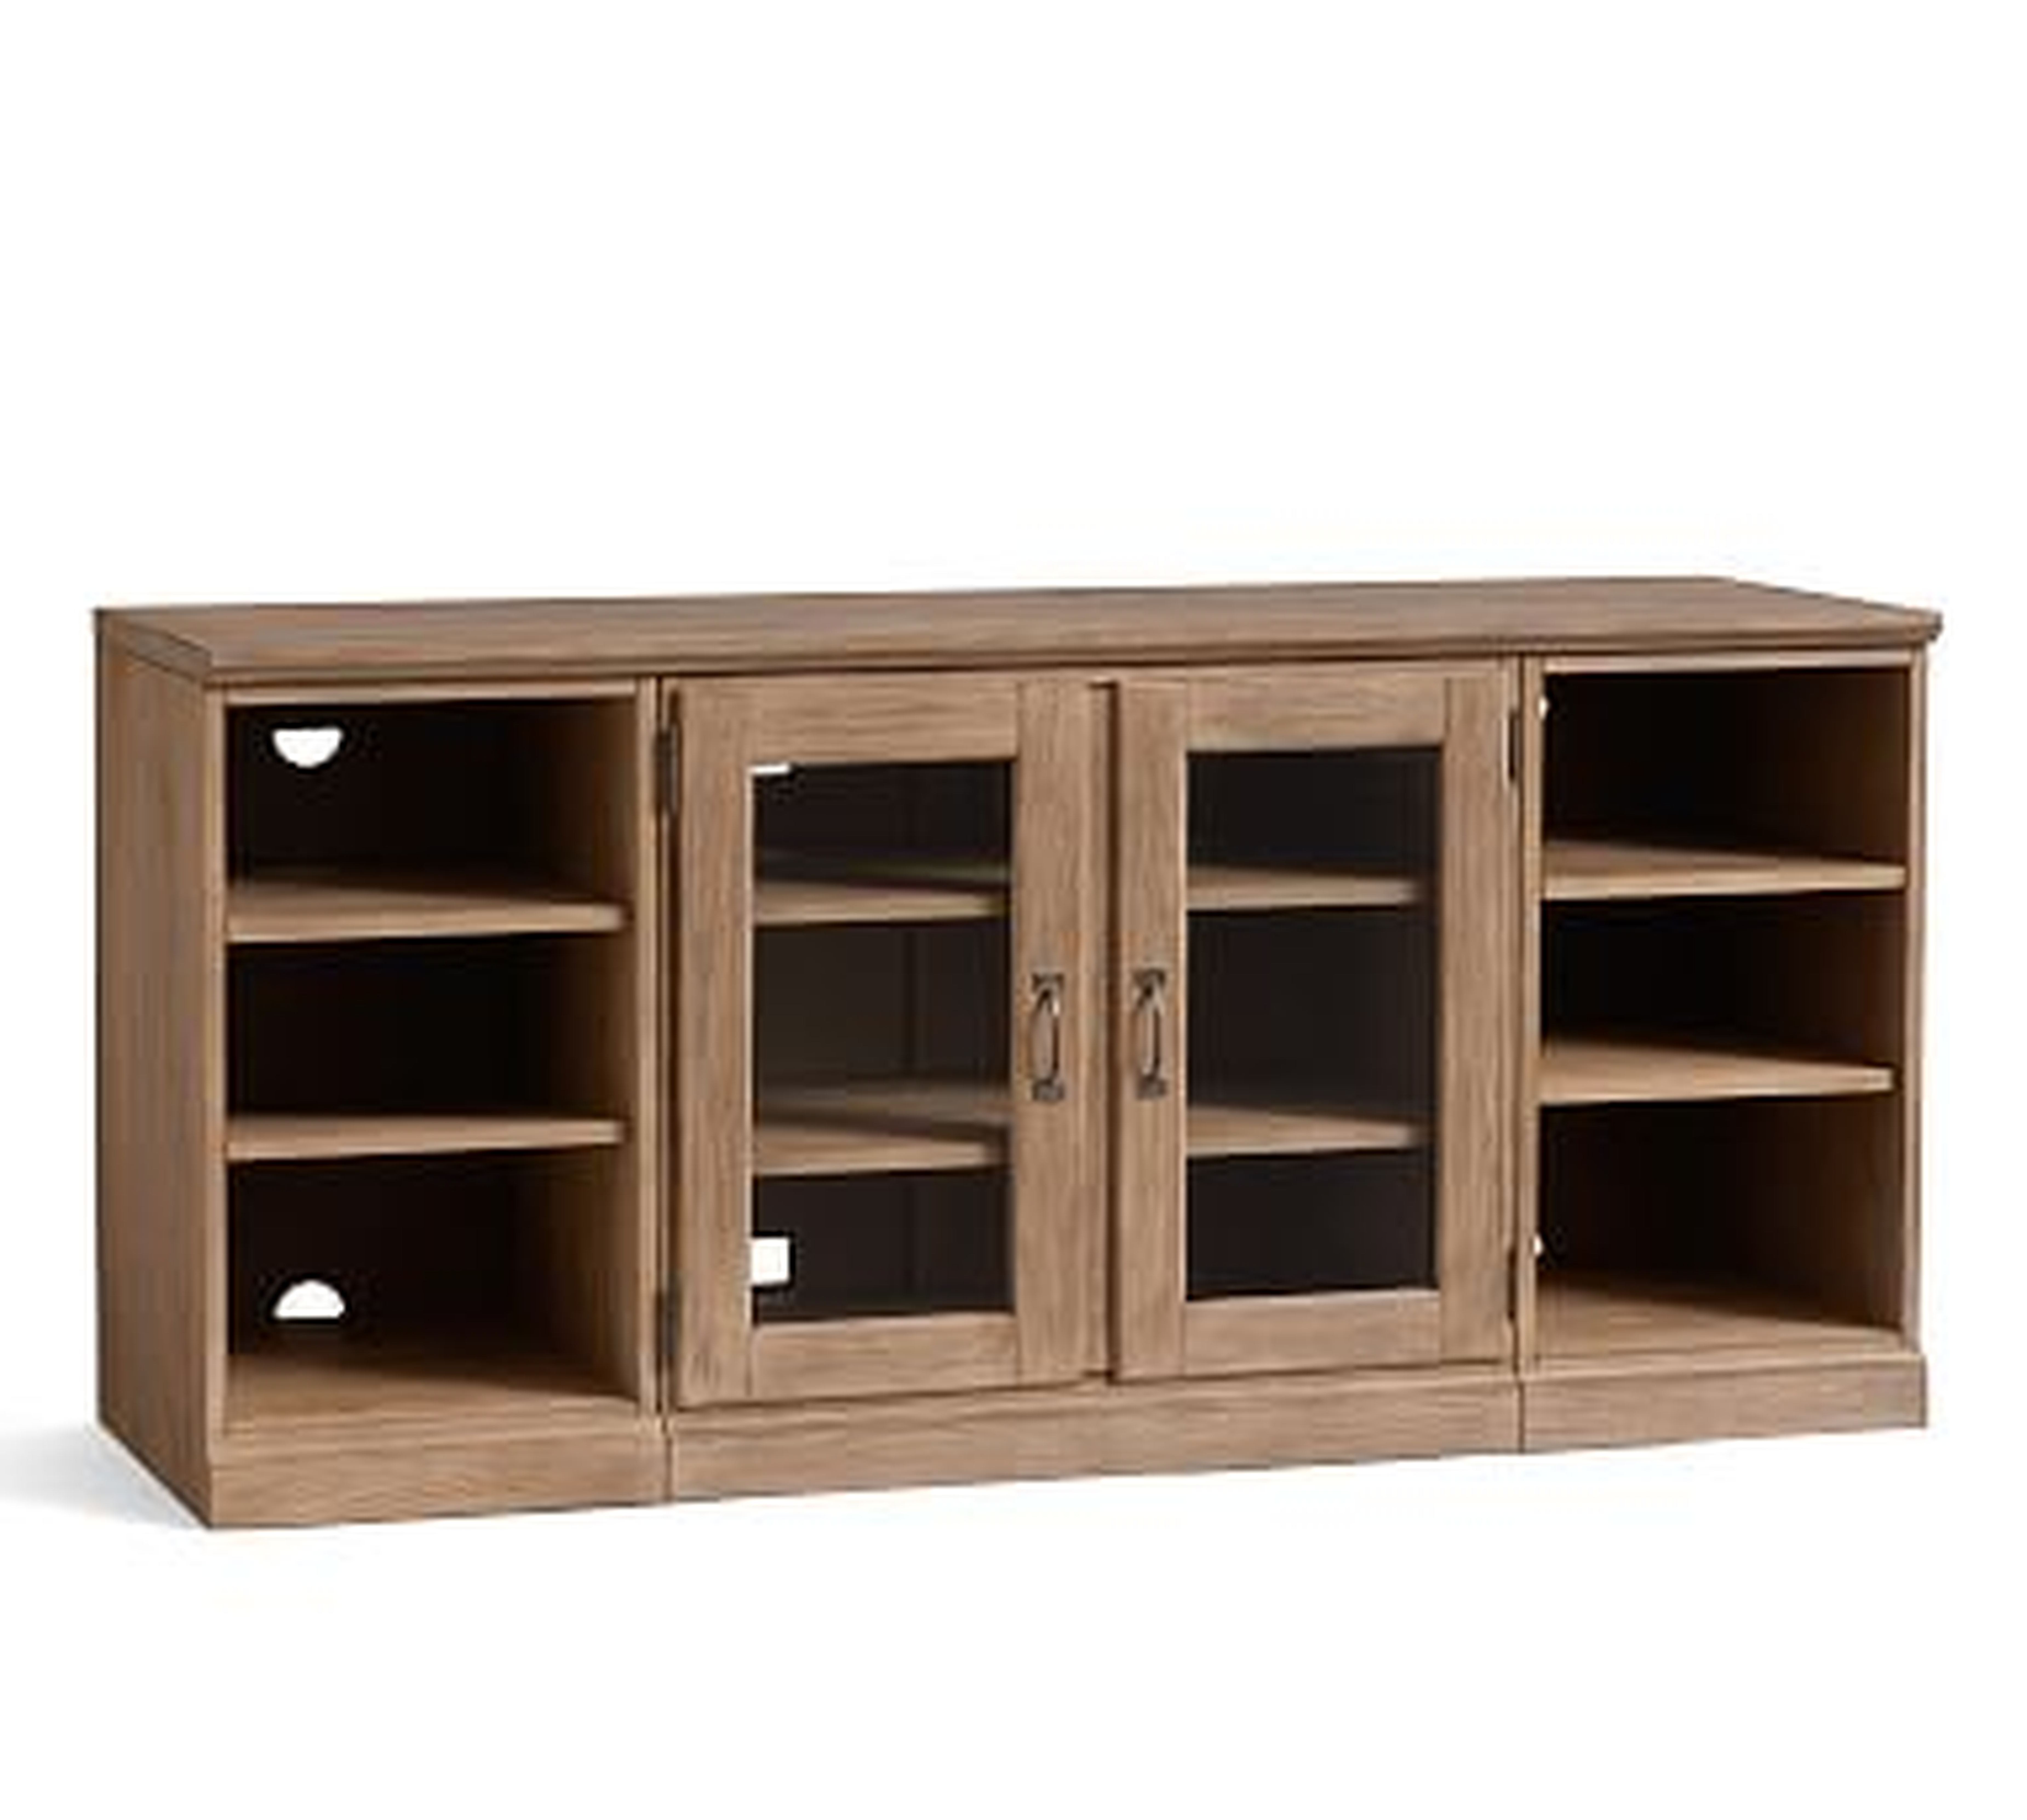 Printer's 3-Piece Media Console with Bookcases, 64", Seadrift - Pottery Barn